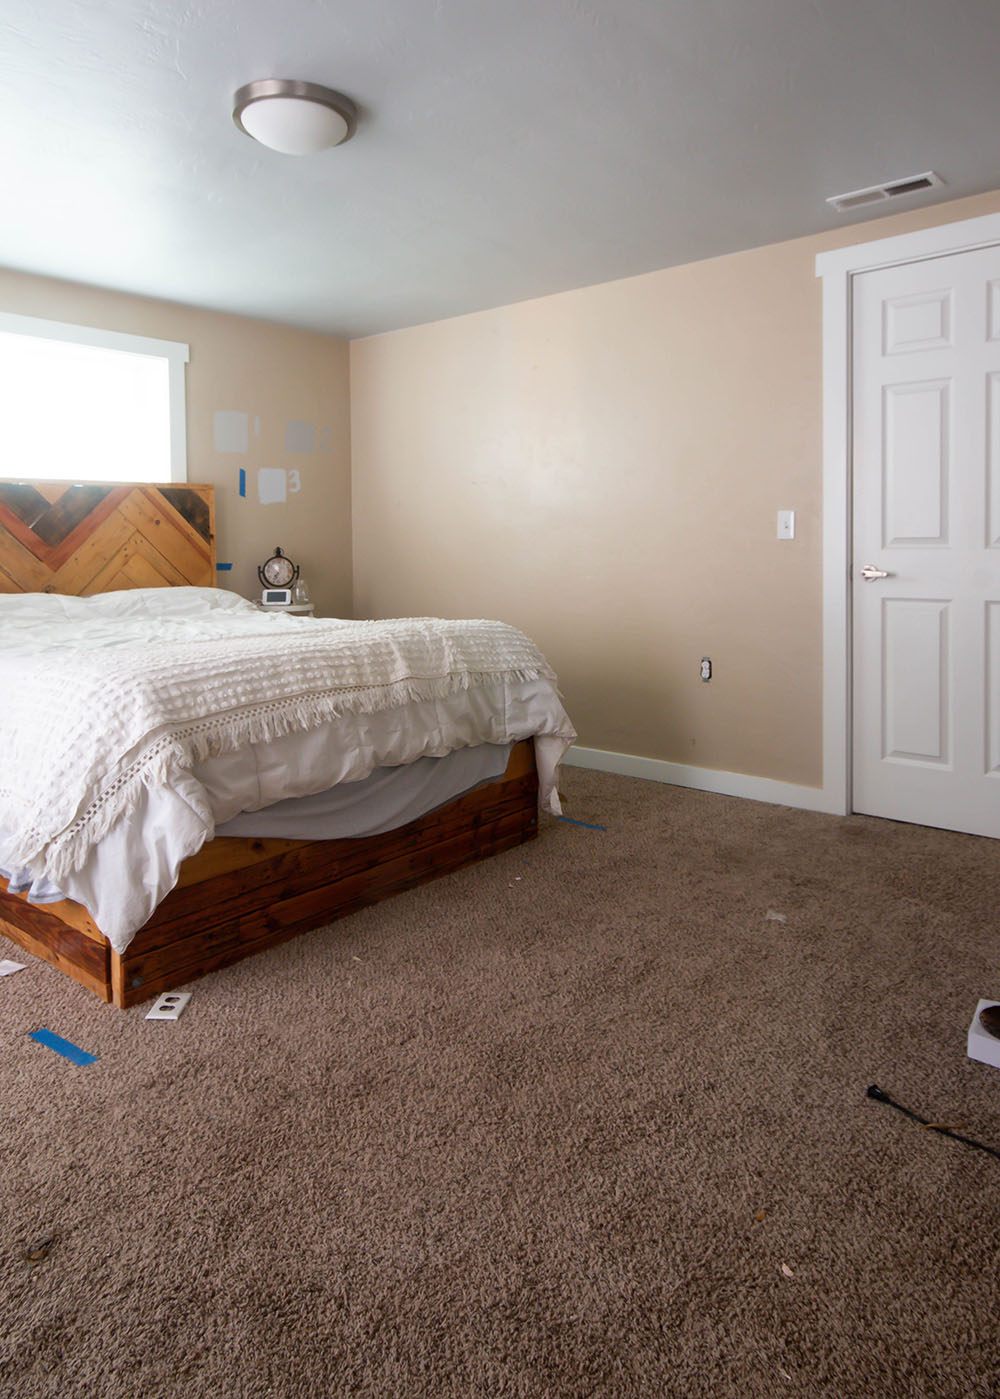 Bedroom with a bed, a white comforter, beige walls, beige carpet, one window, and one white closet door.